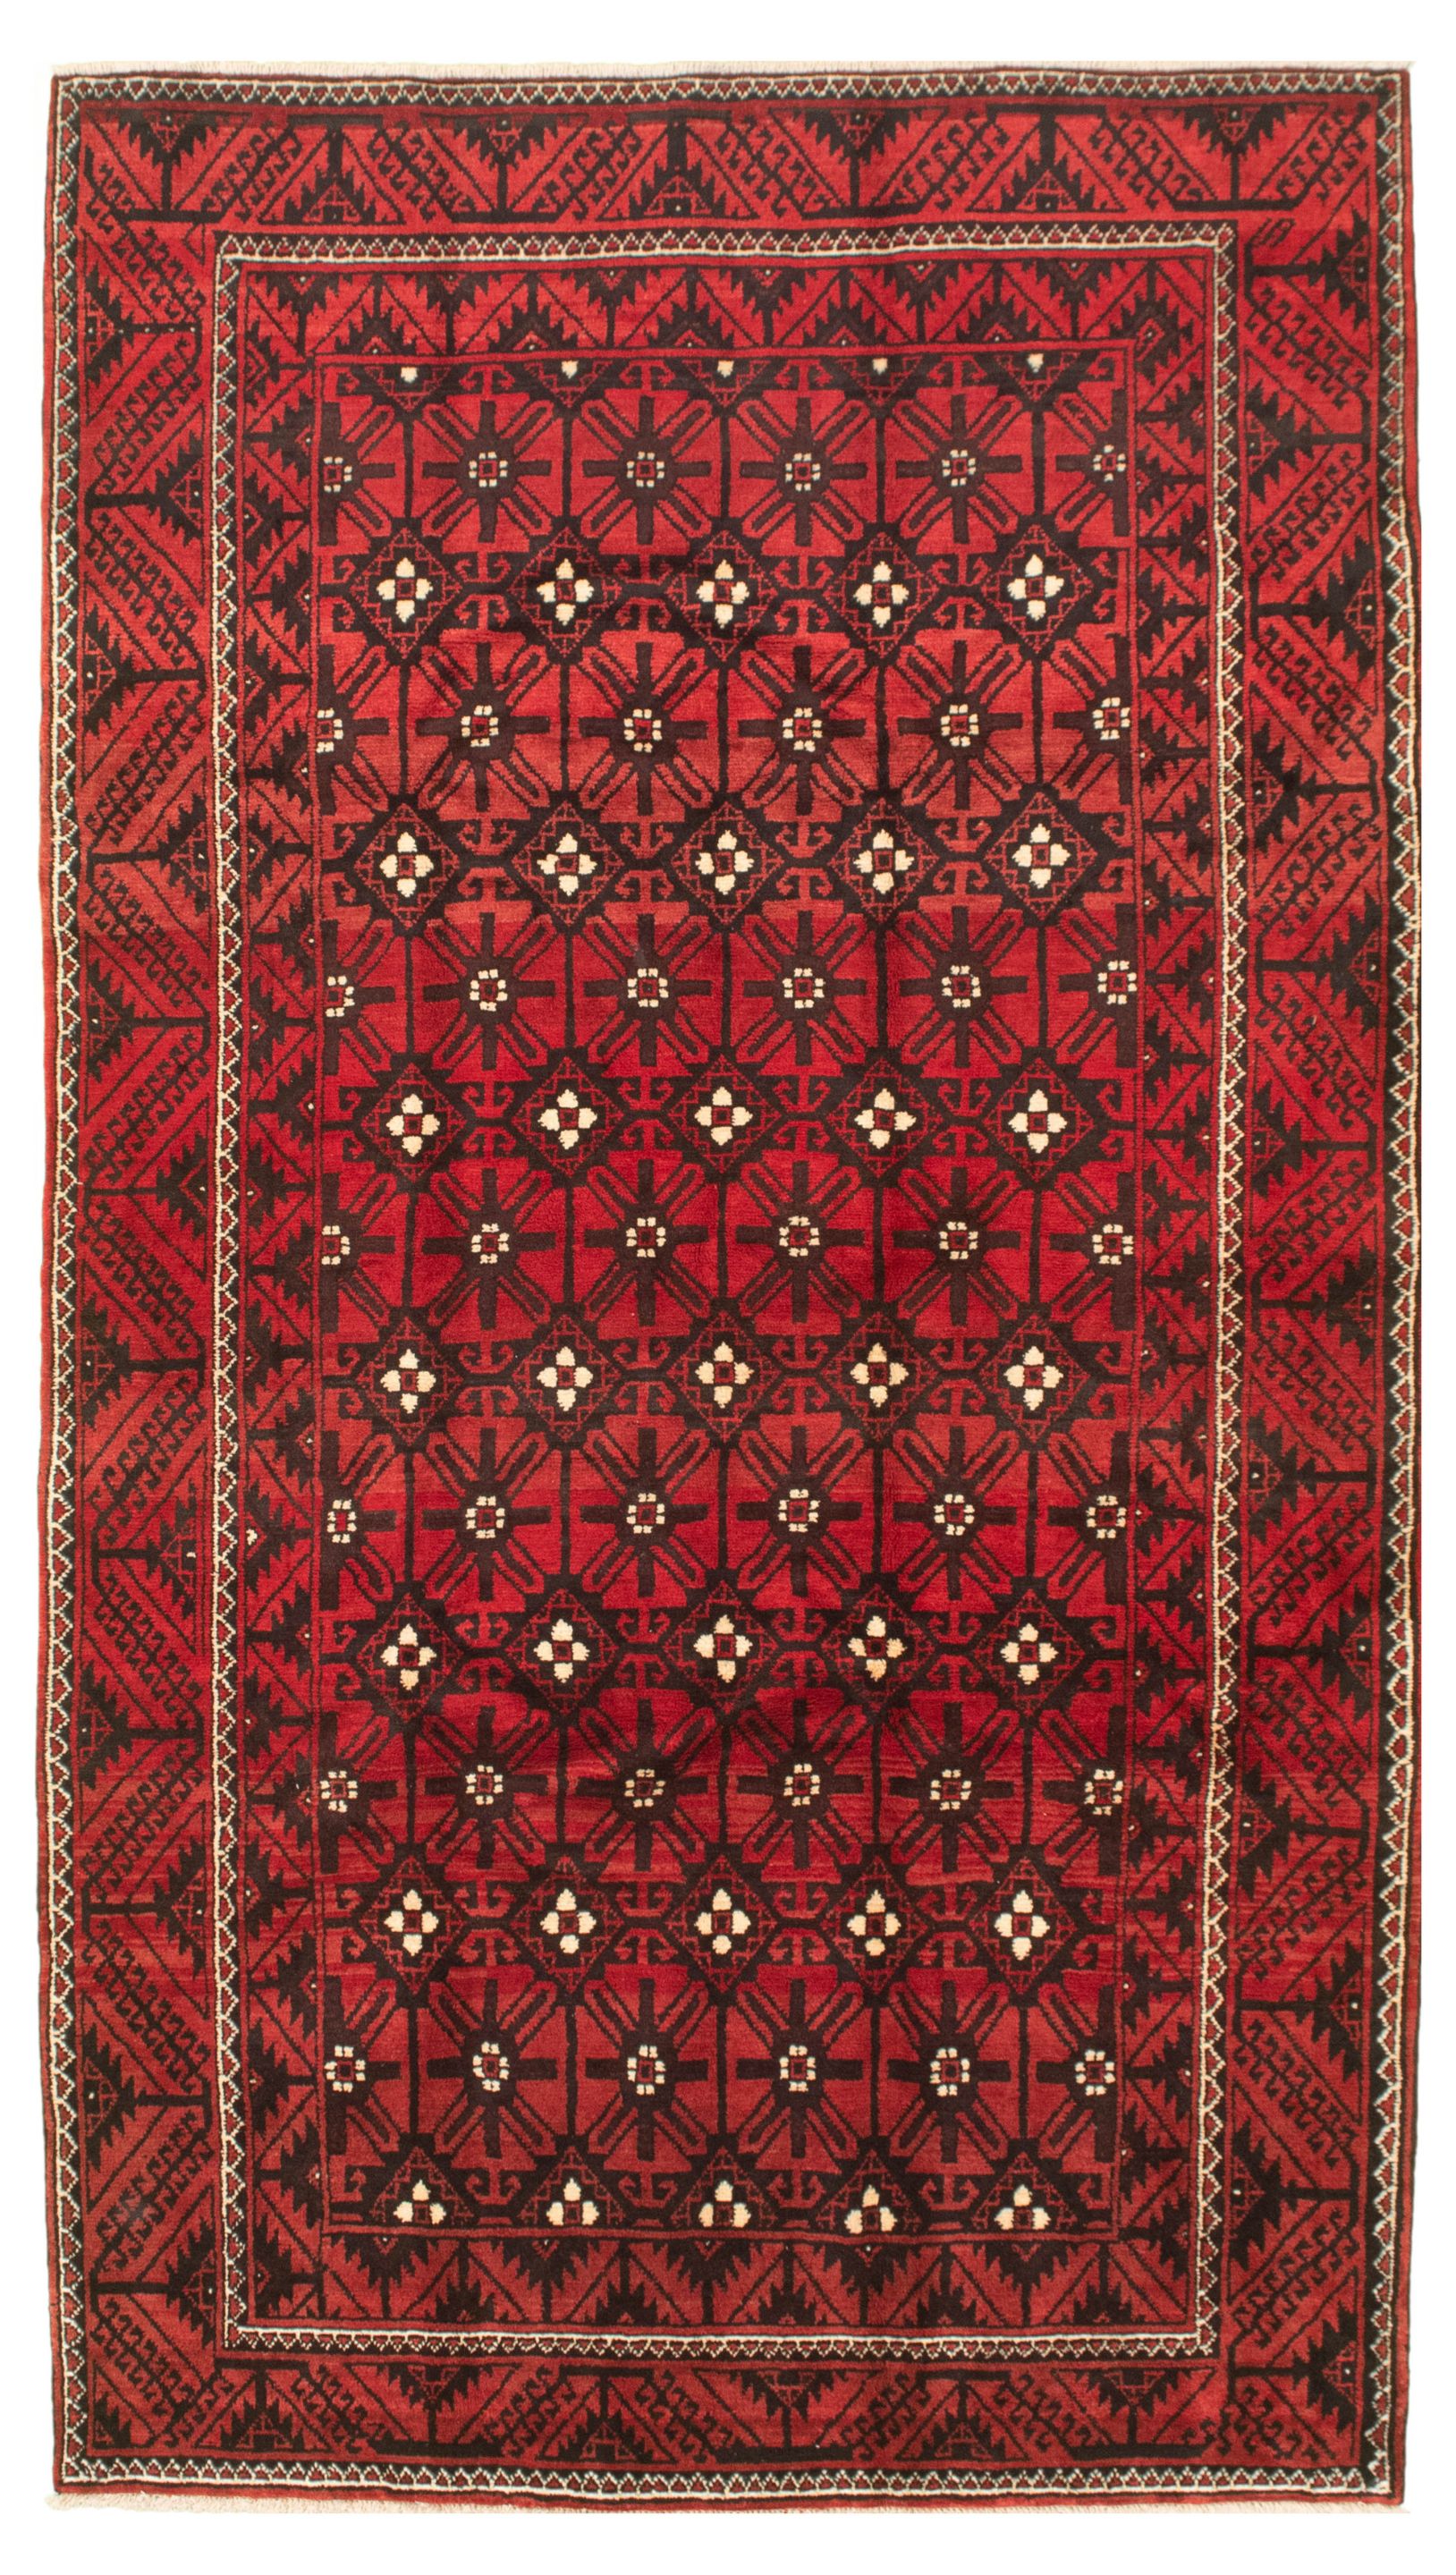 Hand-knotted Authentic Turkish Red Wool Rug 5'4" x 9'3"  Size: 5'4" x 9'3"  